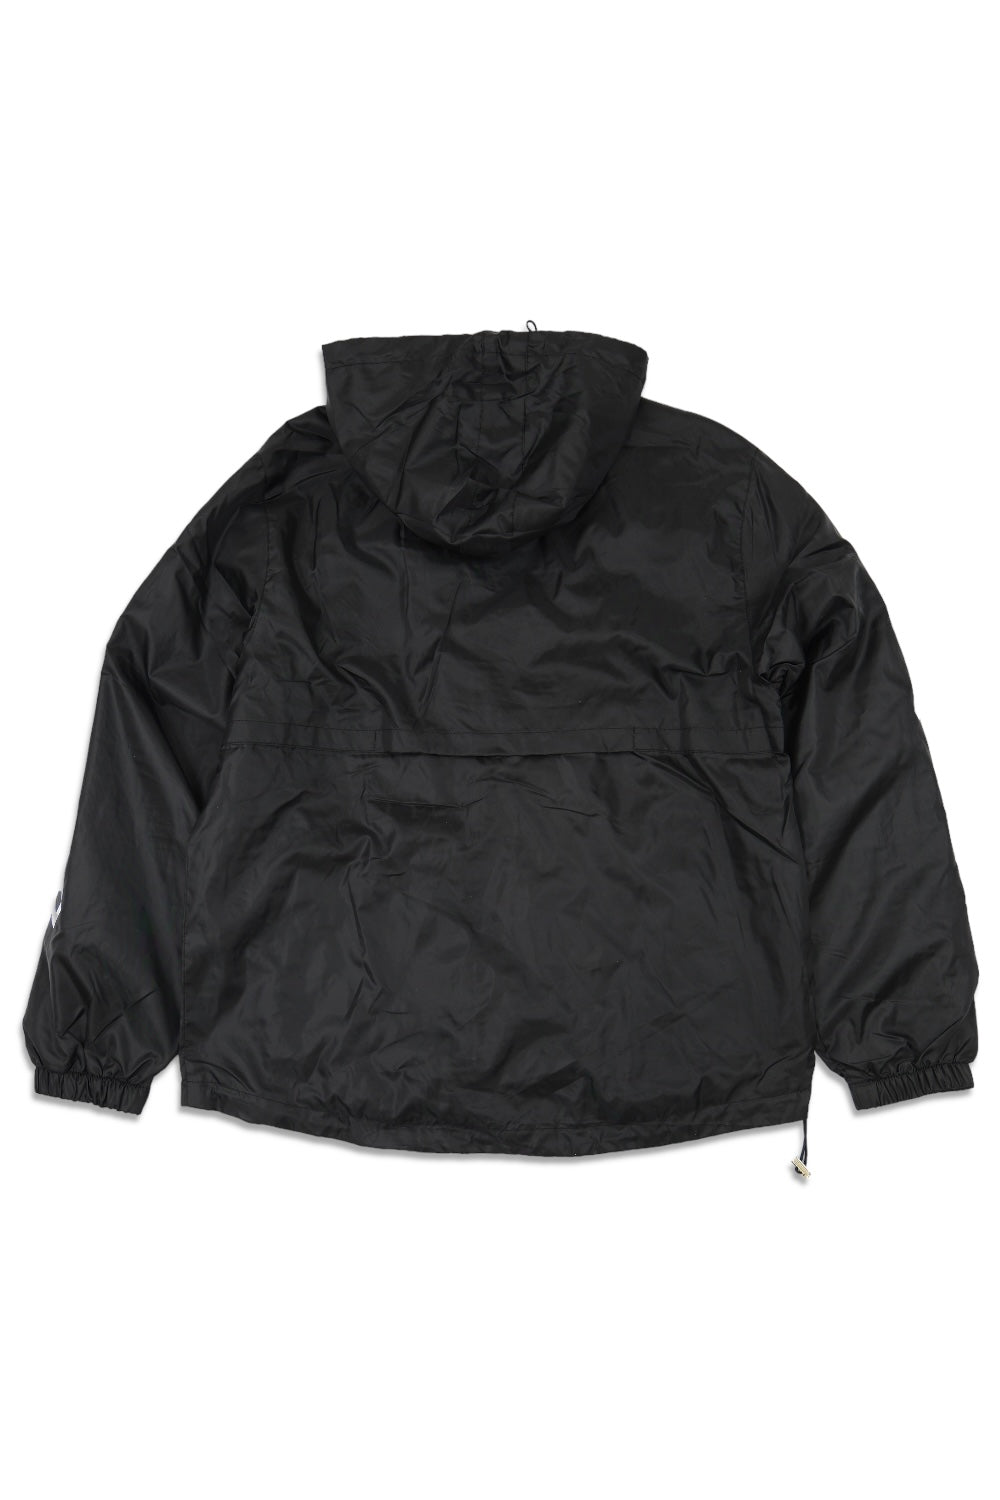 Loyalty and Respect Windbreaker